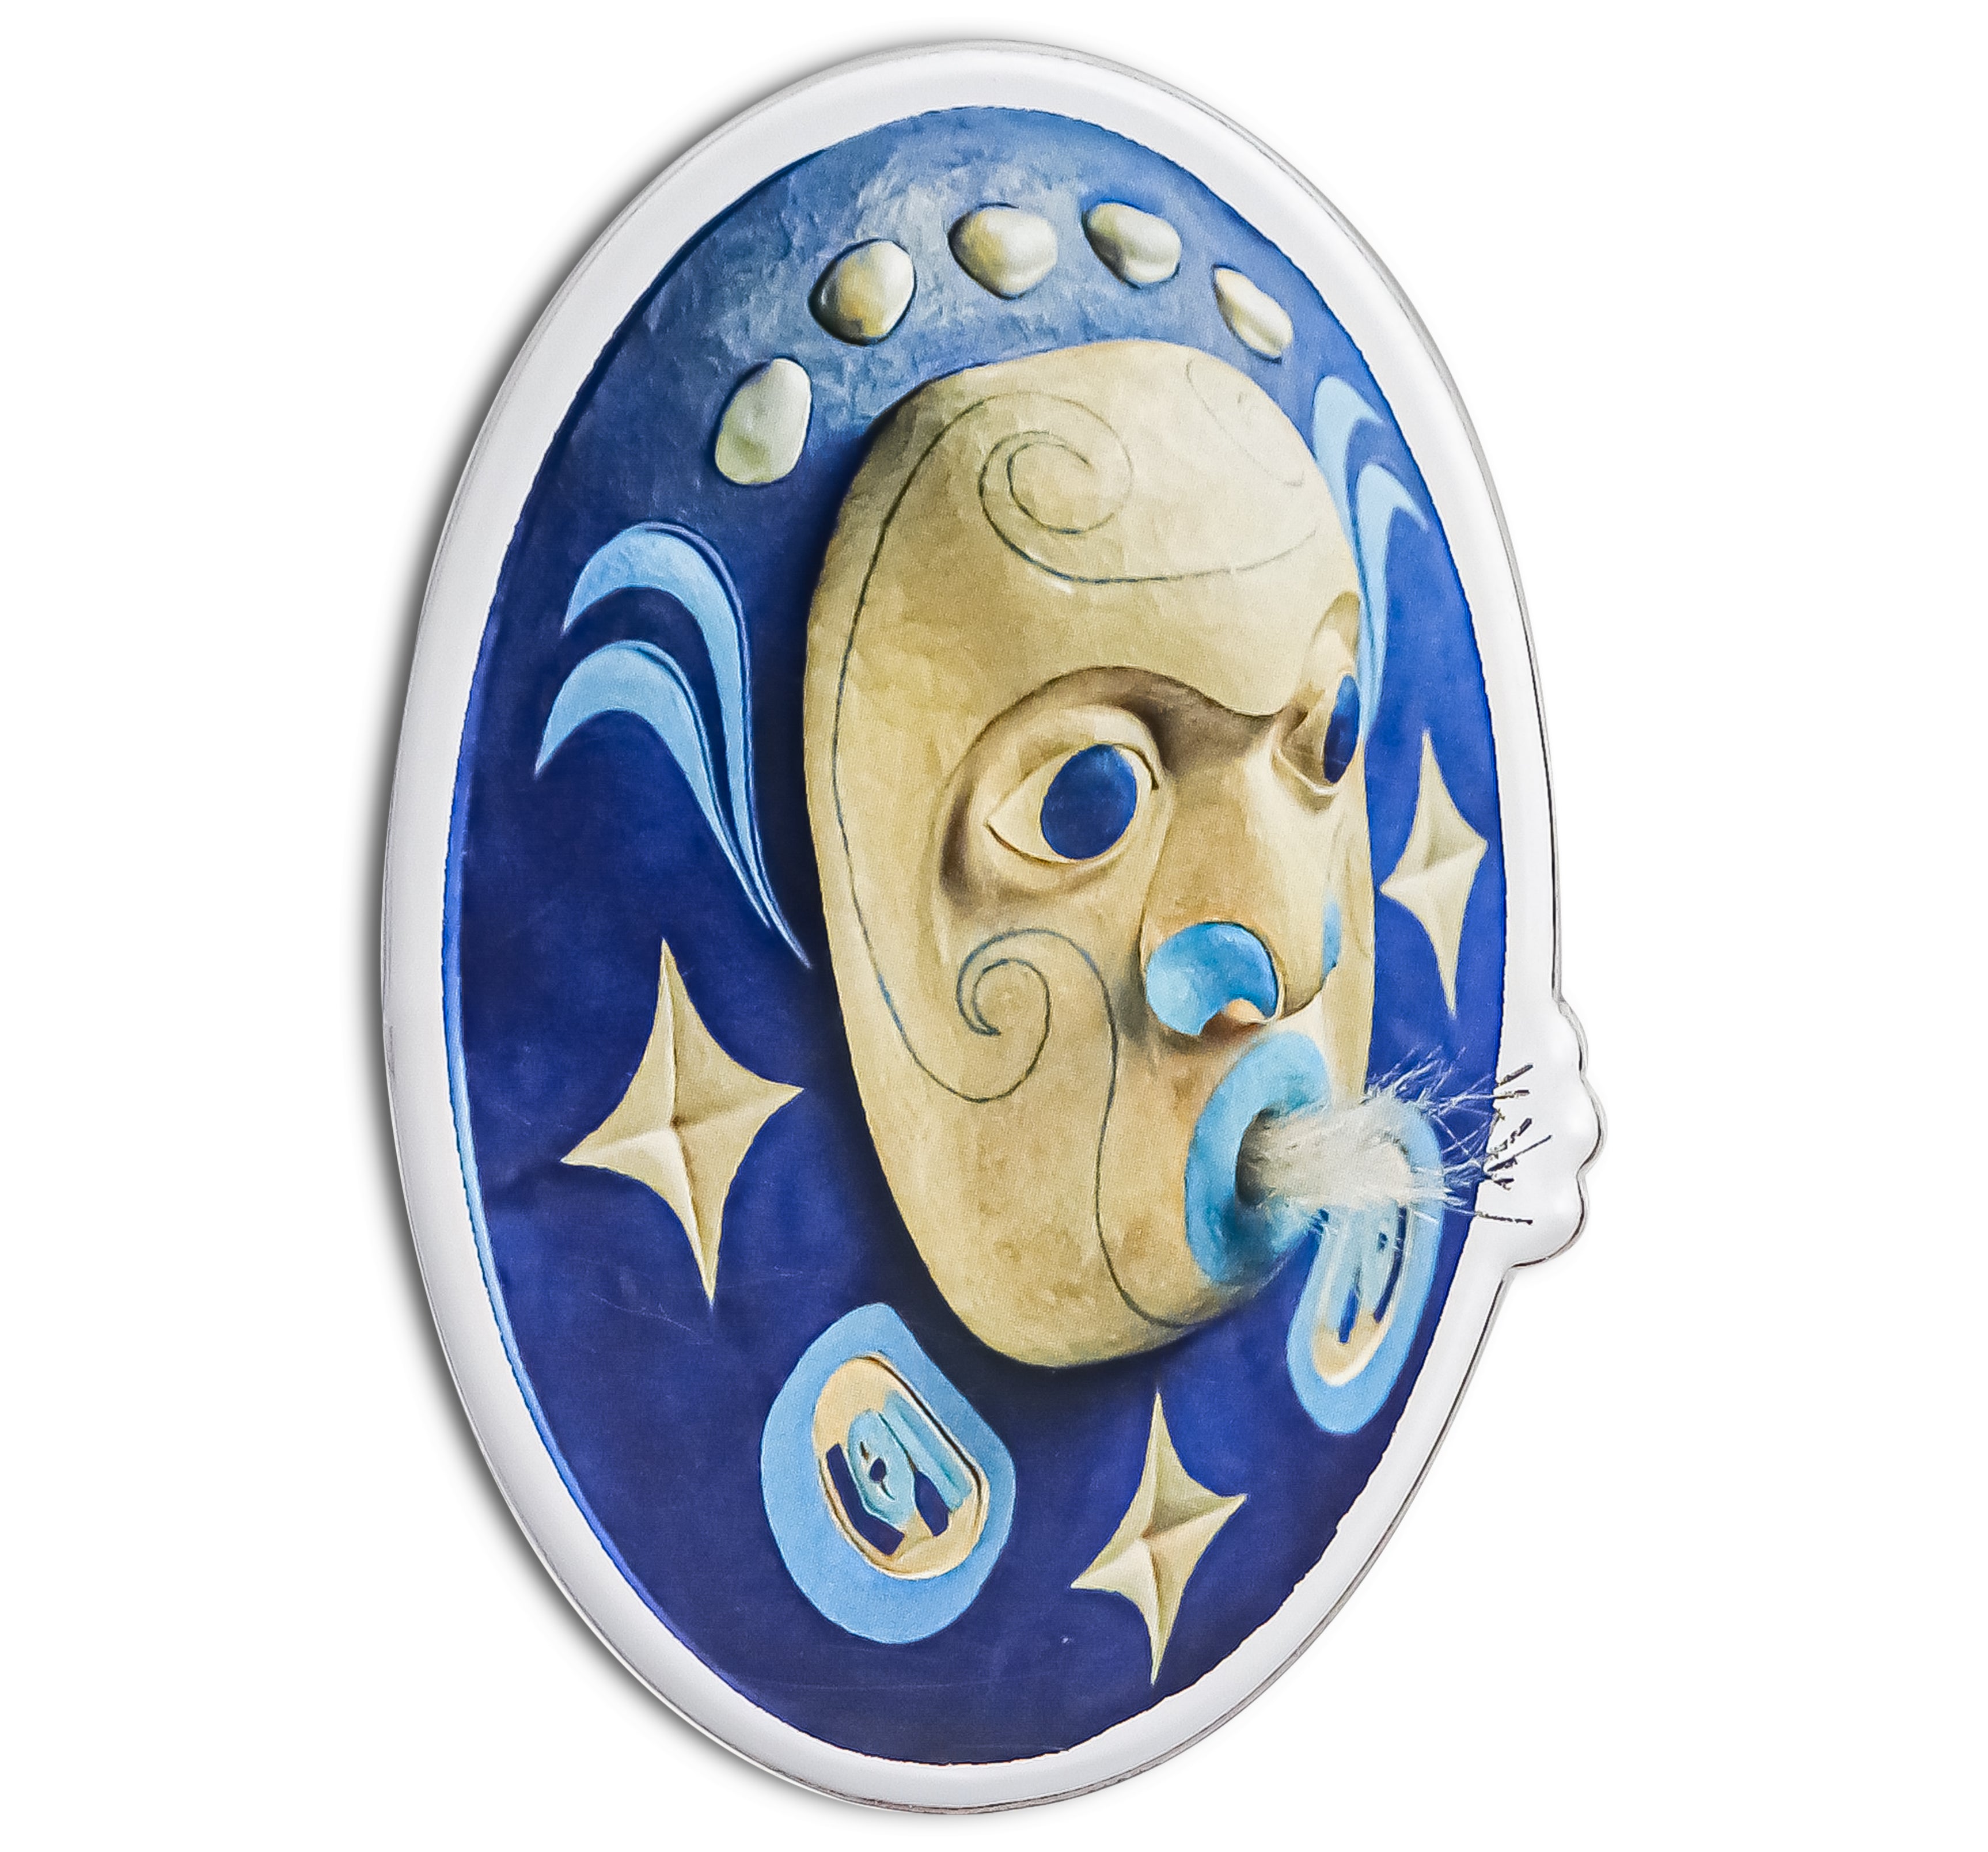 Glacierbay Winter Moon Mask Native Fridge Magnet originally carved and painted by Fred Fulmer Tlingit Artist